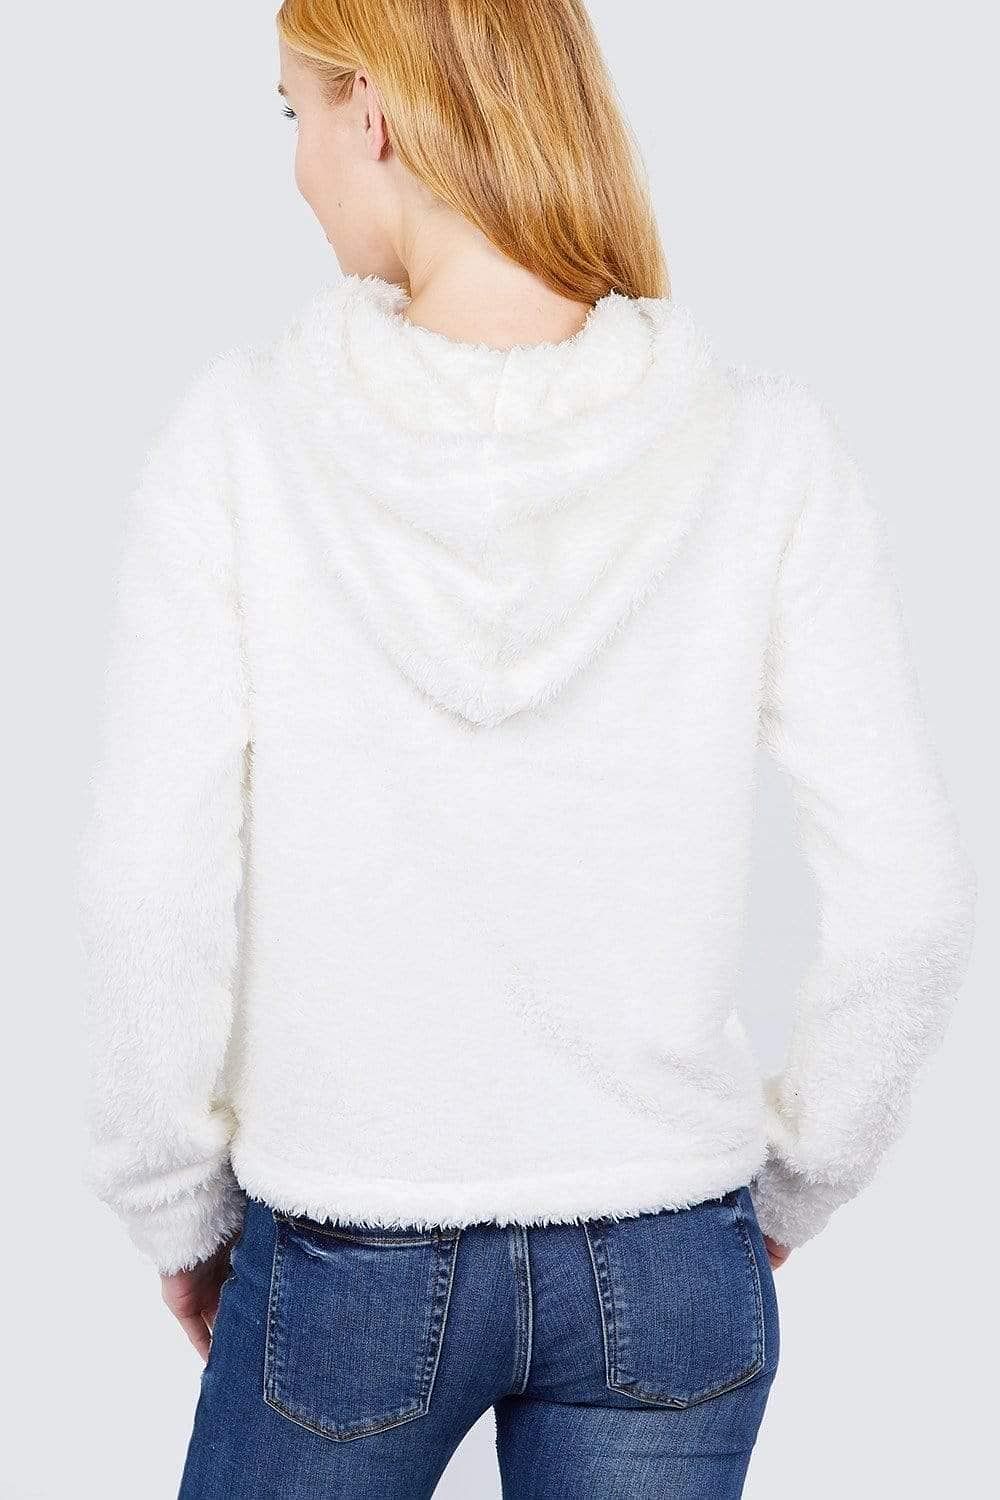 Ivory Long Sleeve Faux Fur Sweater - Shopping Therapy L Top